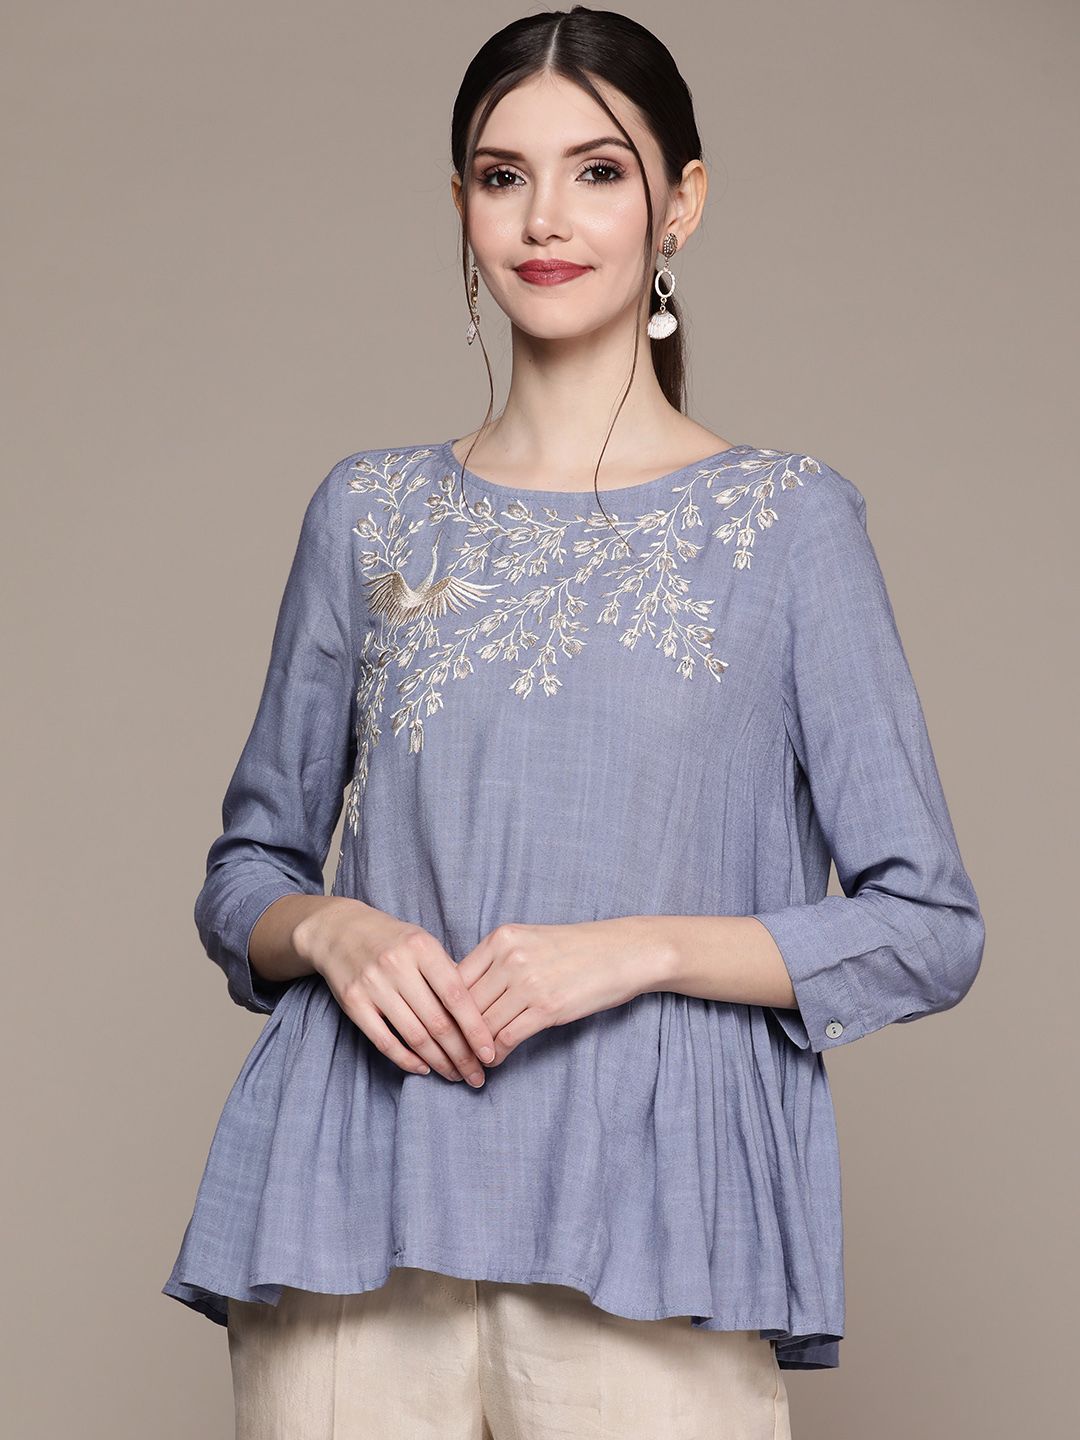 aarke Ritu Kumar Blue Floral Embroidered Top Price in India